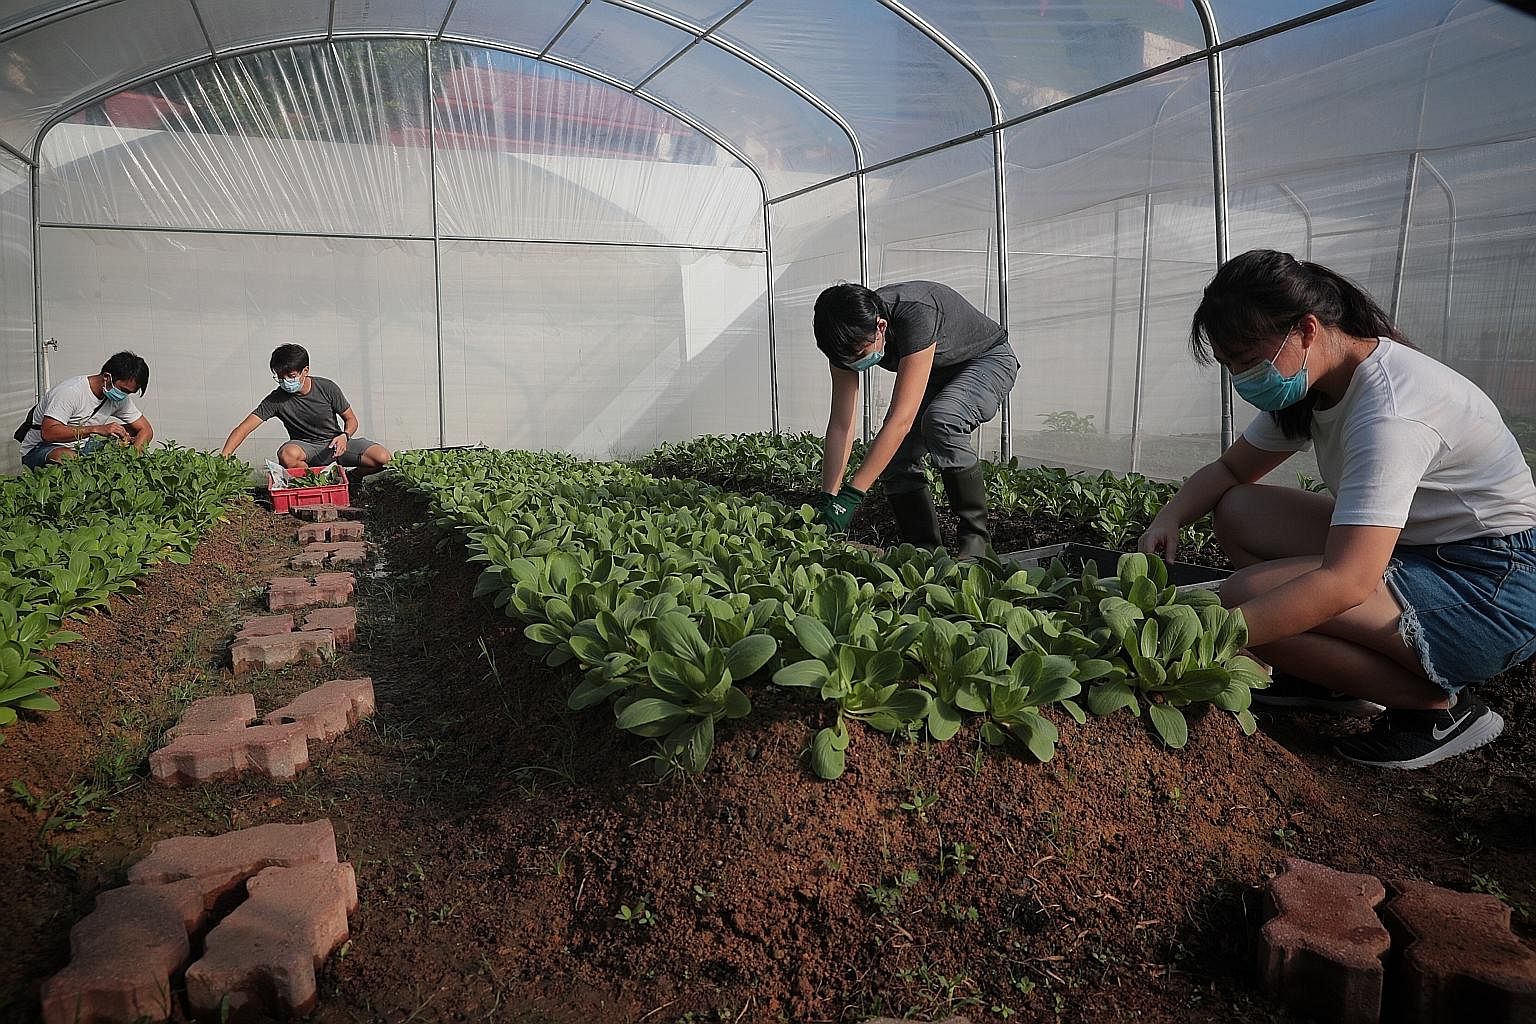 (From far left) Social enterprise City Sprouts co-founders Zac Toh, 28, and Chee Zhi Kin, 26, and their staff Tan Kor Hoon, 48, and Rachel Lee, 21, harvesting vegetables from their urban farm at the former site of Henderson Secondary School in the Bu